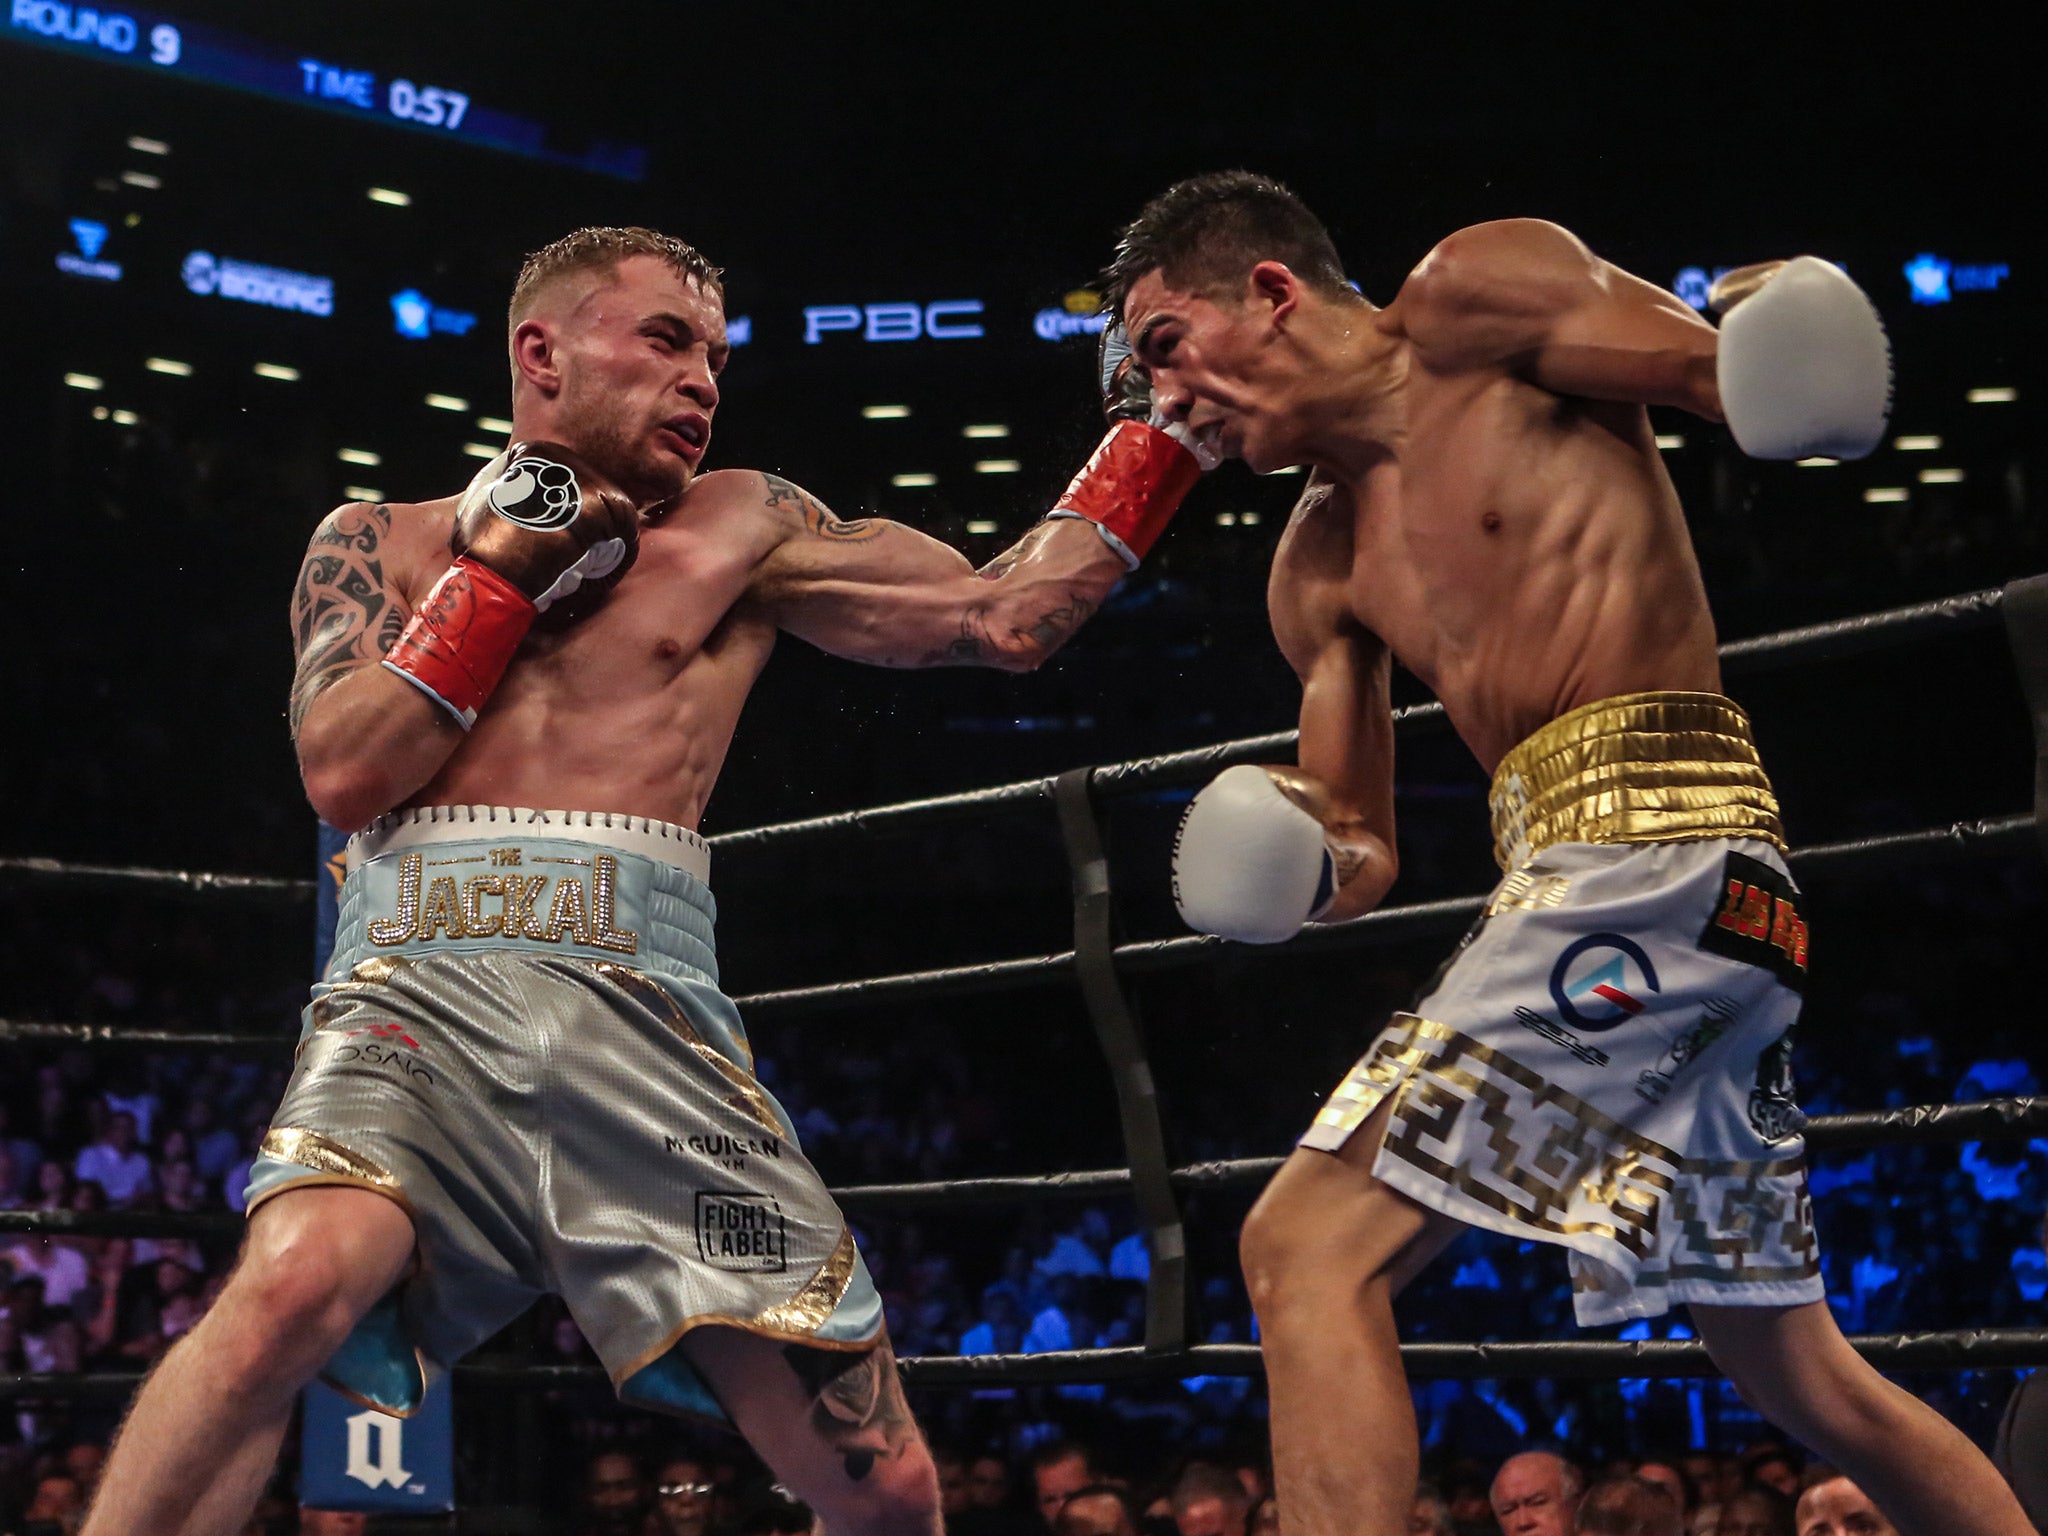 Frampton enjoyed a ferocious support inside the Barclays Centre in Brooklyn